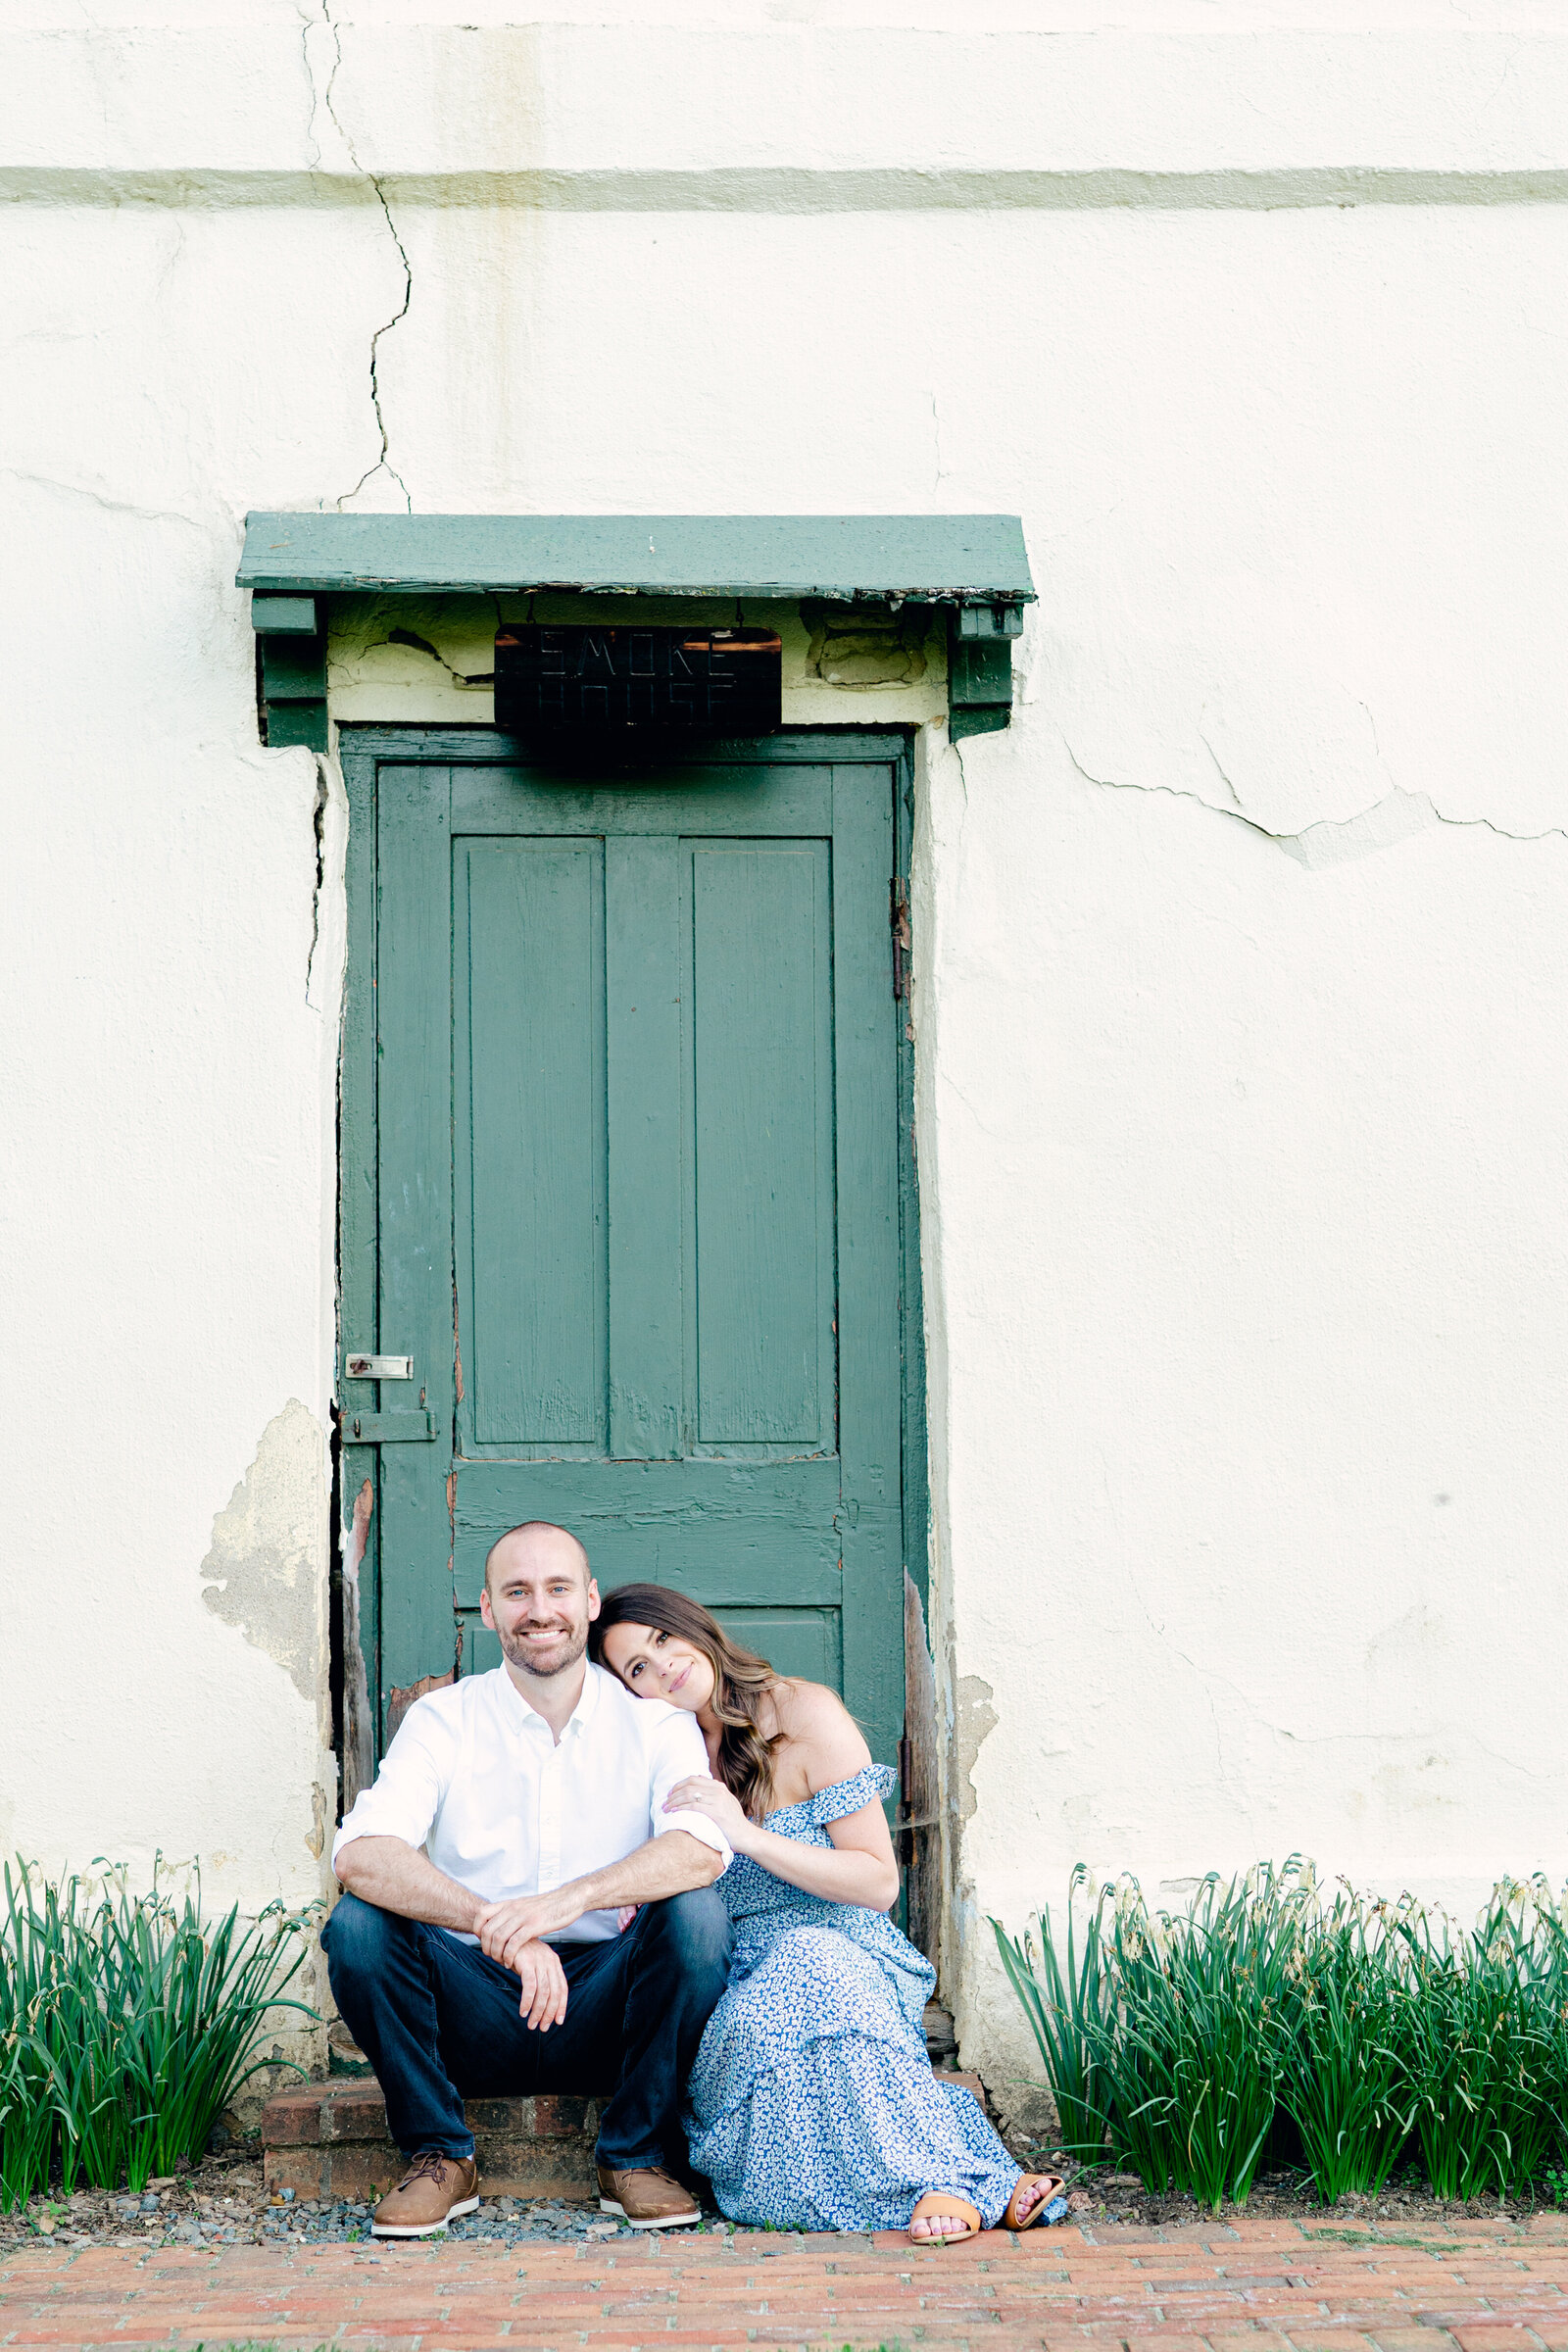 COuple sits in front of green door surrounded by grass